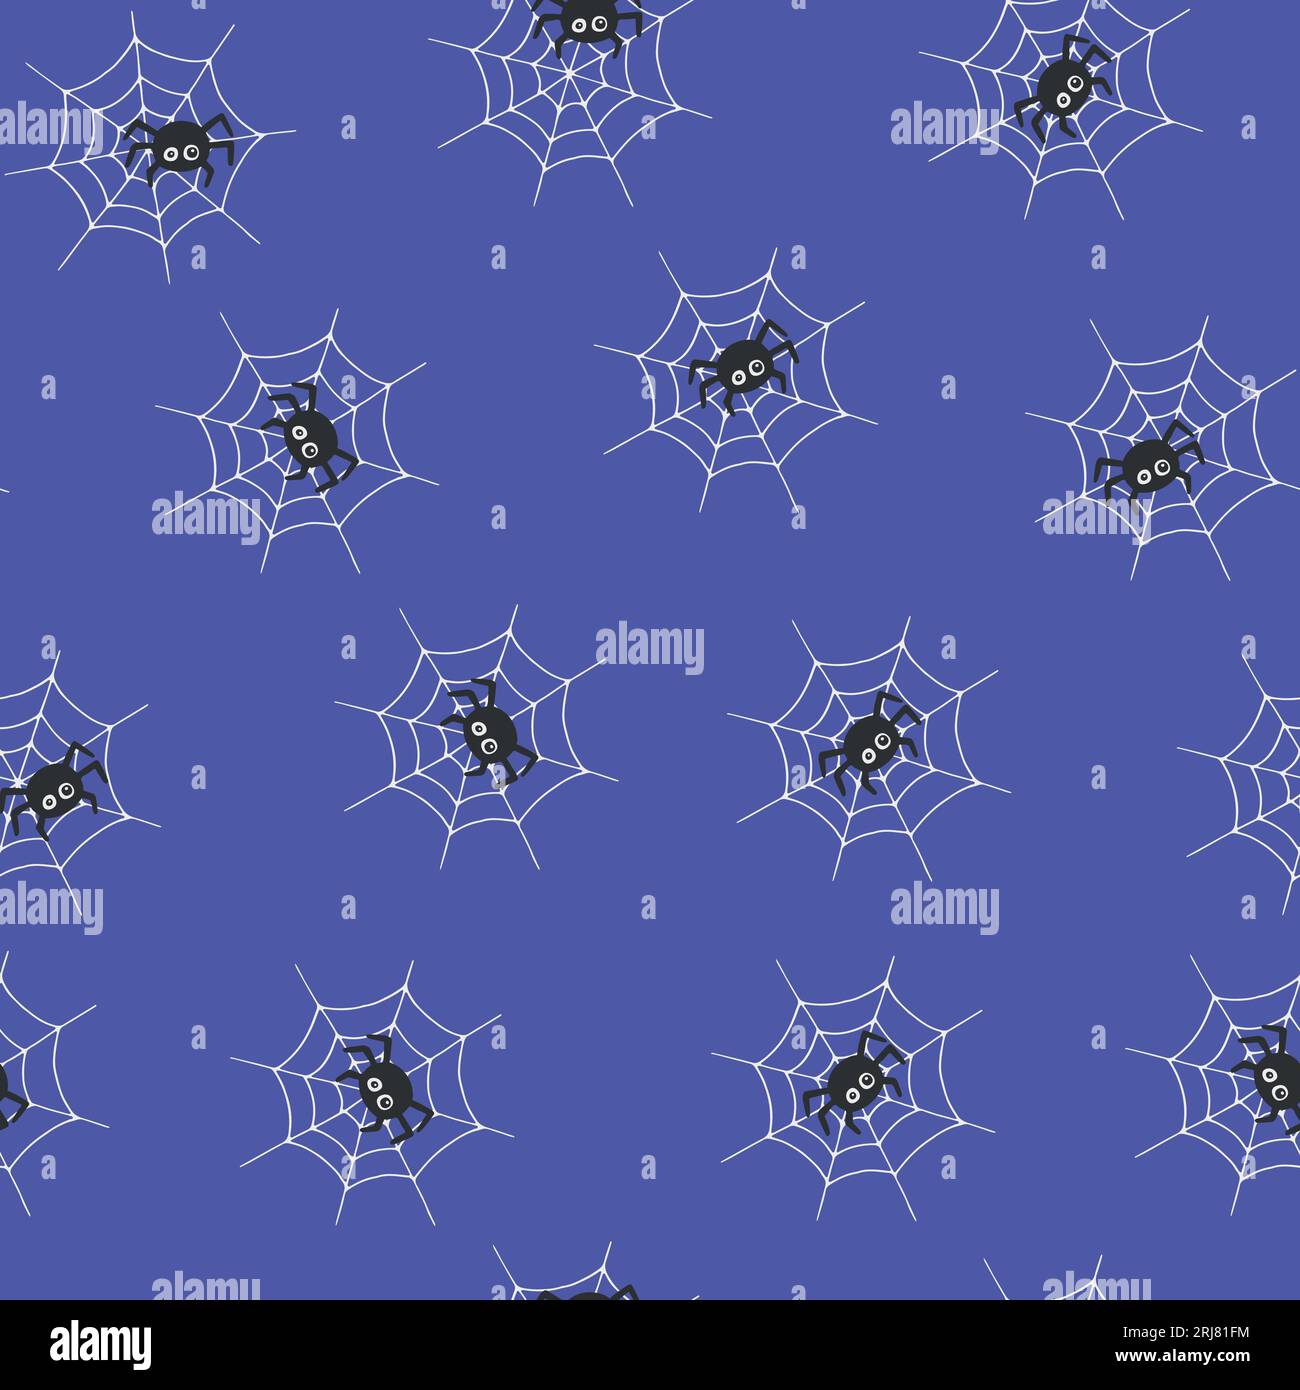 Black spider on a web seamless pattern. Simple repeating pattern for Halloween. Vector illustration Stock Vector